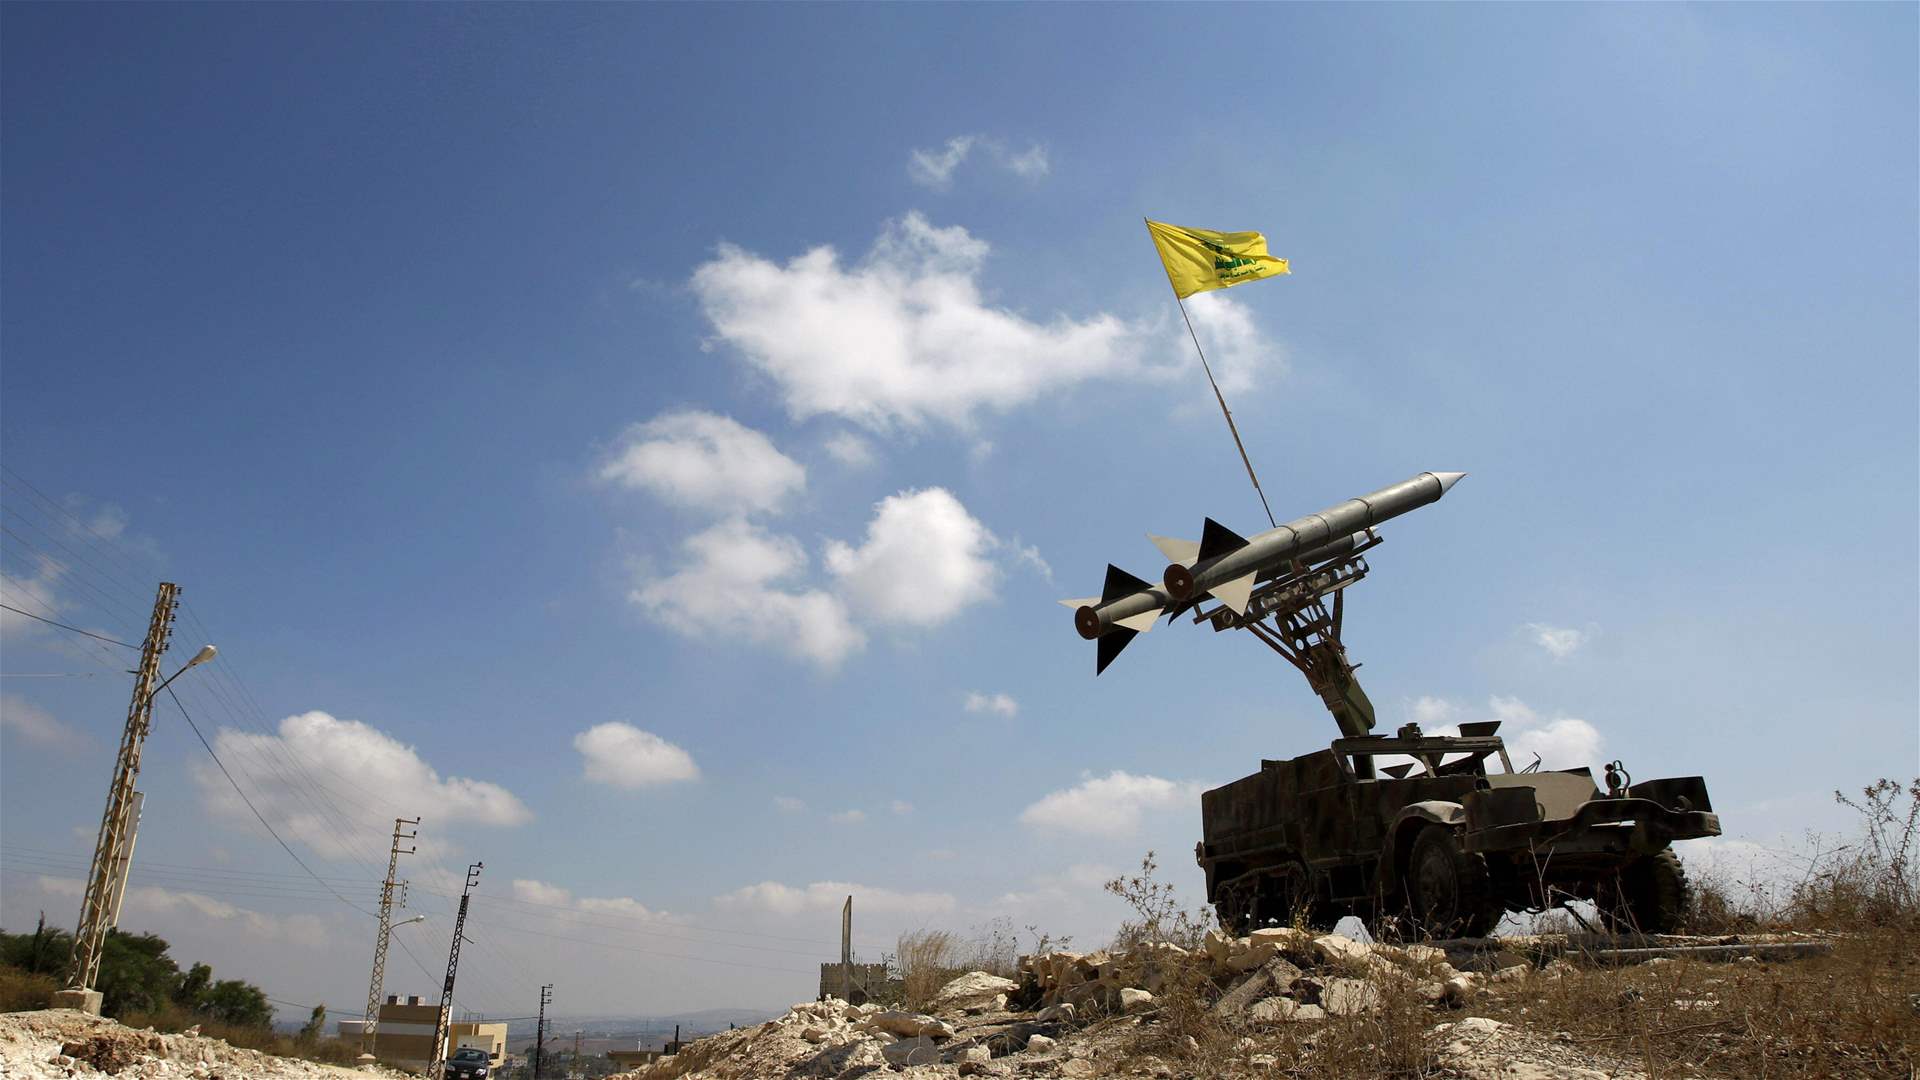  Escalation in the Middle East: Hezbollah&#39;s Operations and the Rising Tensions with Israel